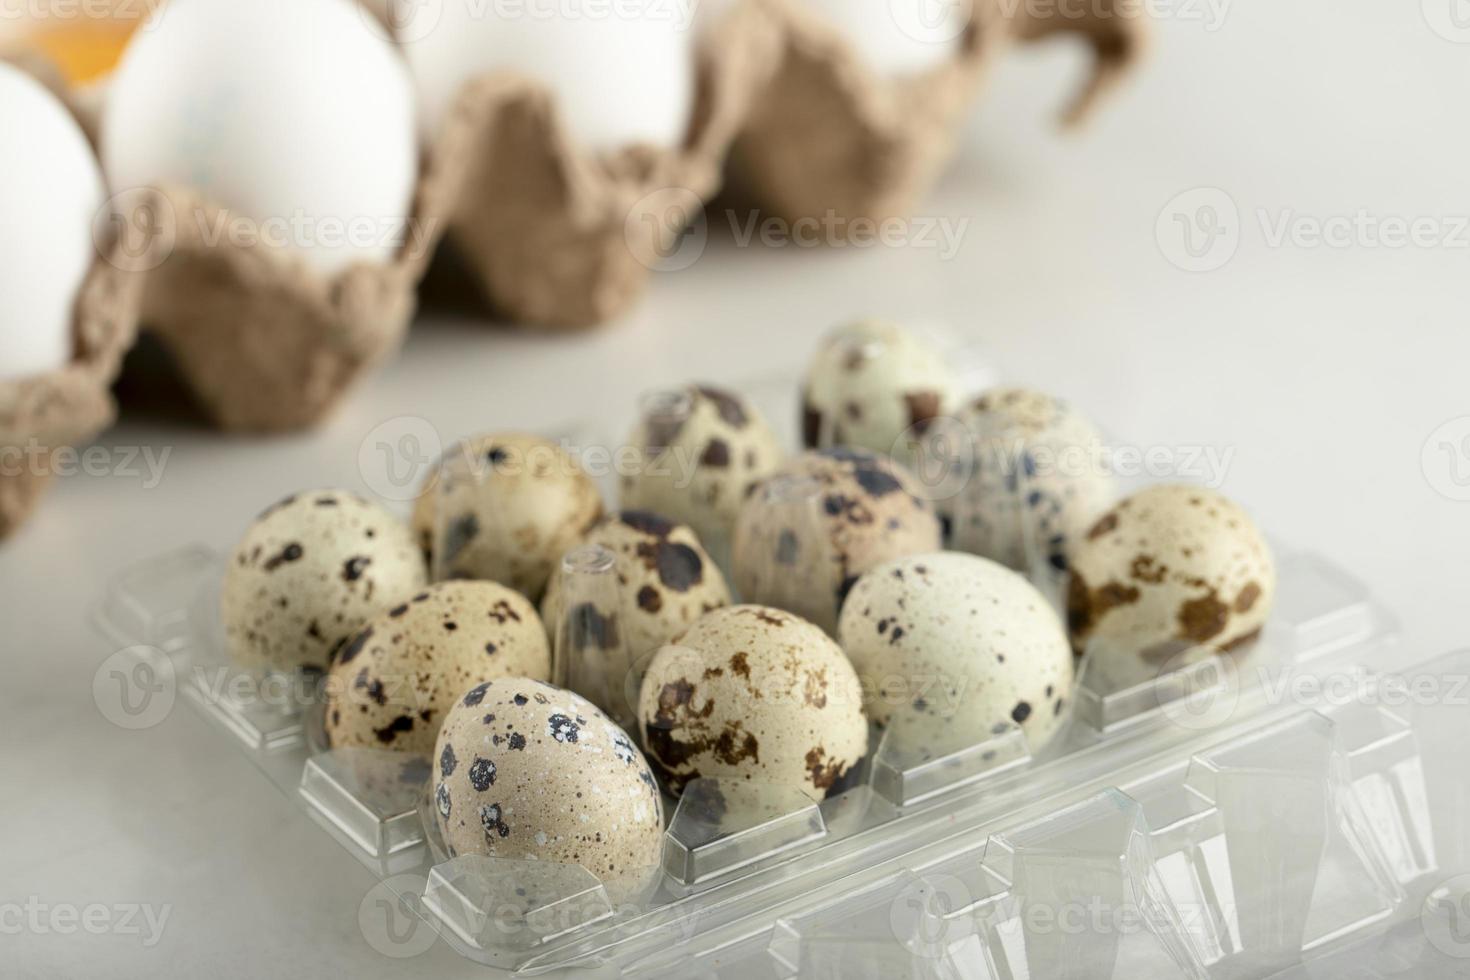 Raw chicken eggs in a carton container and quail eggs photo